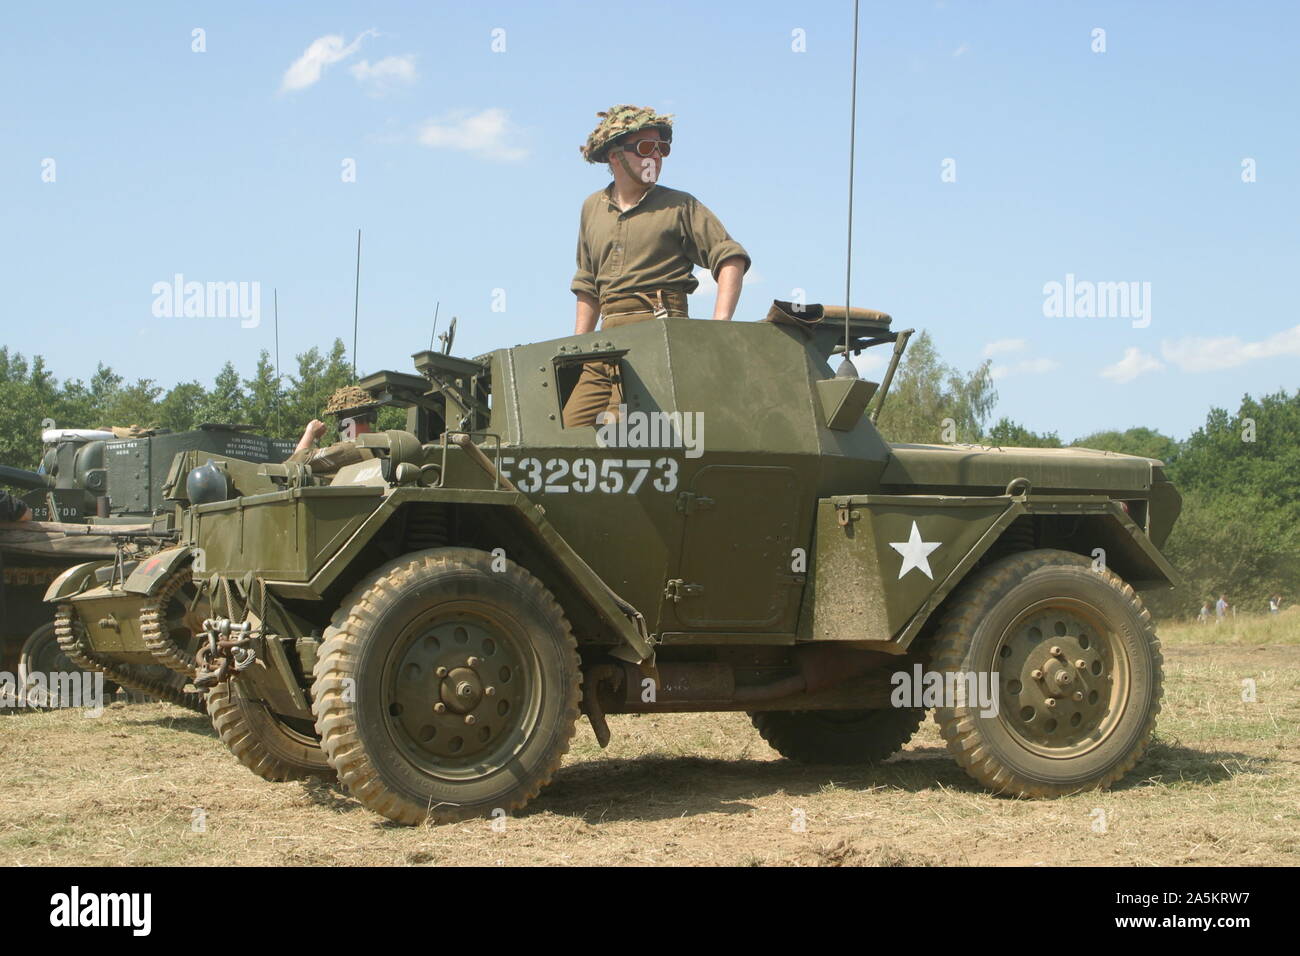 The Daimler Dingo was a light armoured Scott car used by the British Army in WWII. Stock Photo